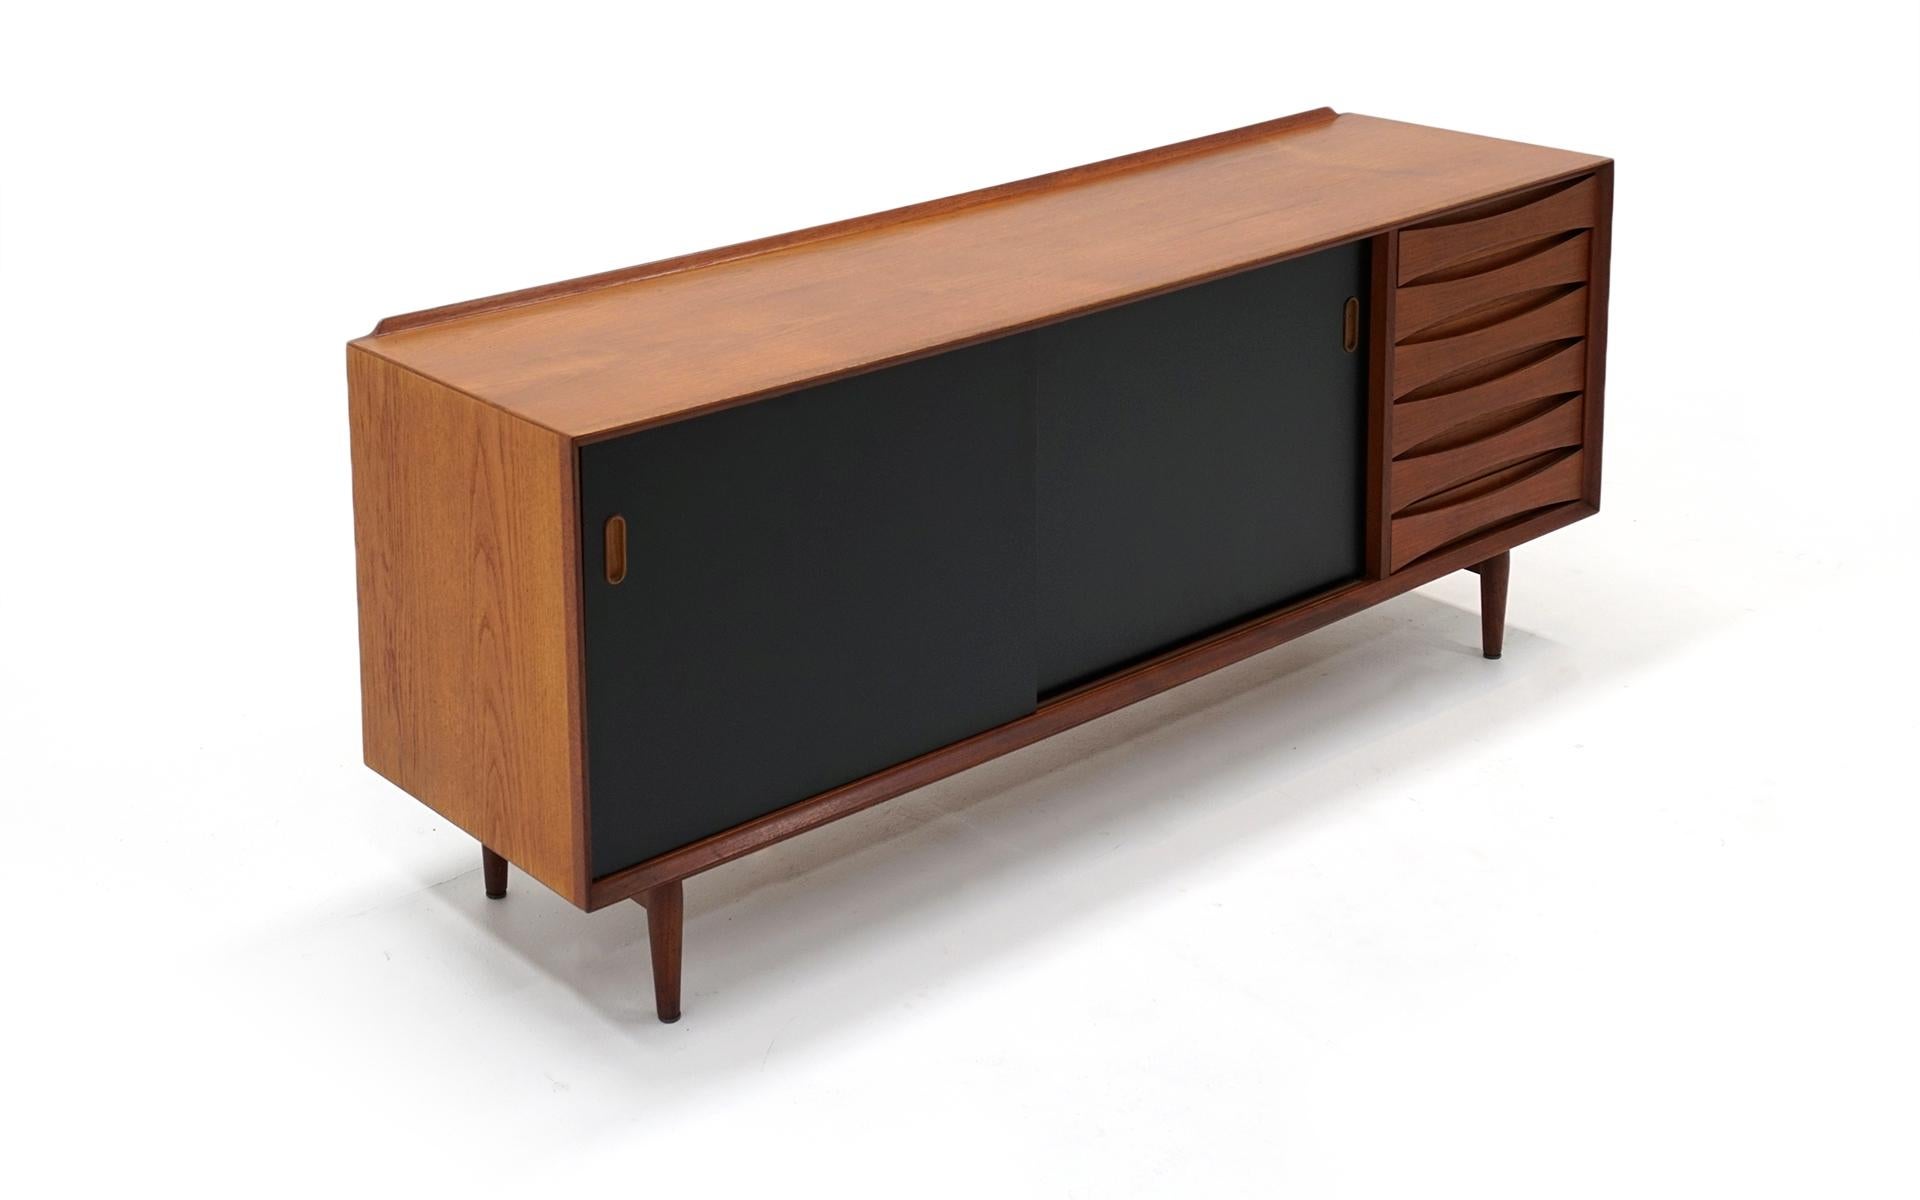 See the photos of this beautiful Danish modern teak credenza with reversible doors. Teak on one side, black lacquer on the other. An important sought after design by Arne Vodder for Sibast. Signed with the Sibast medallion.